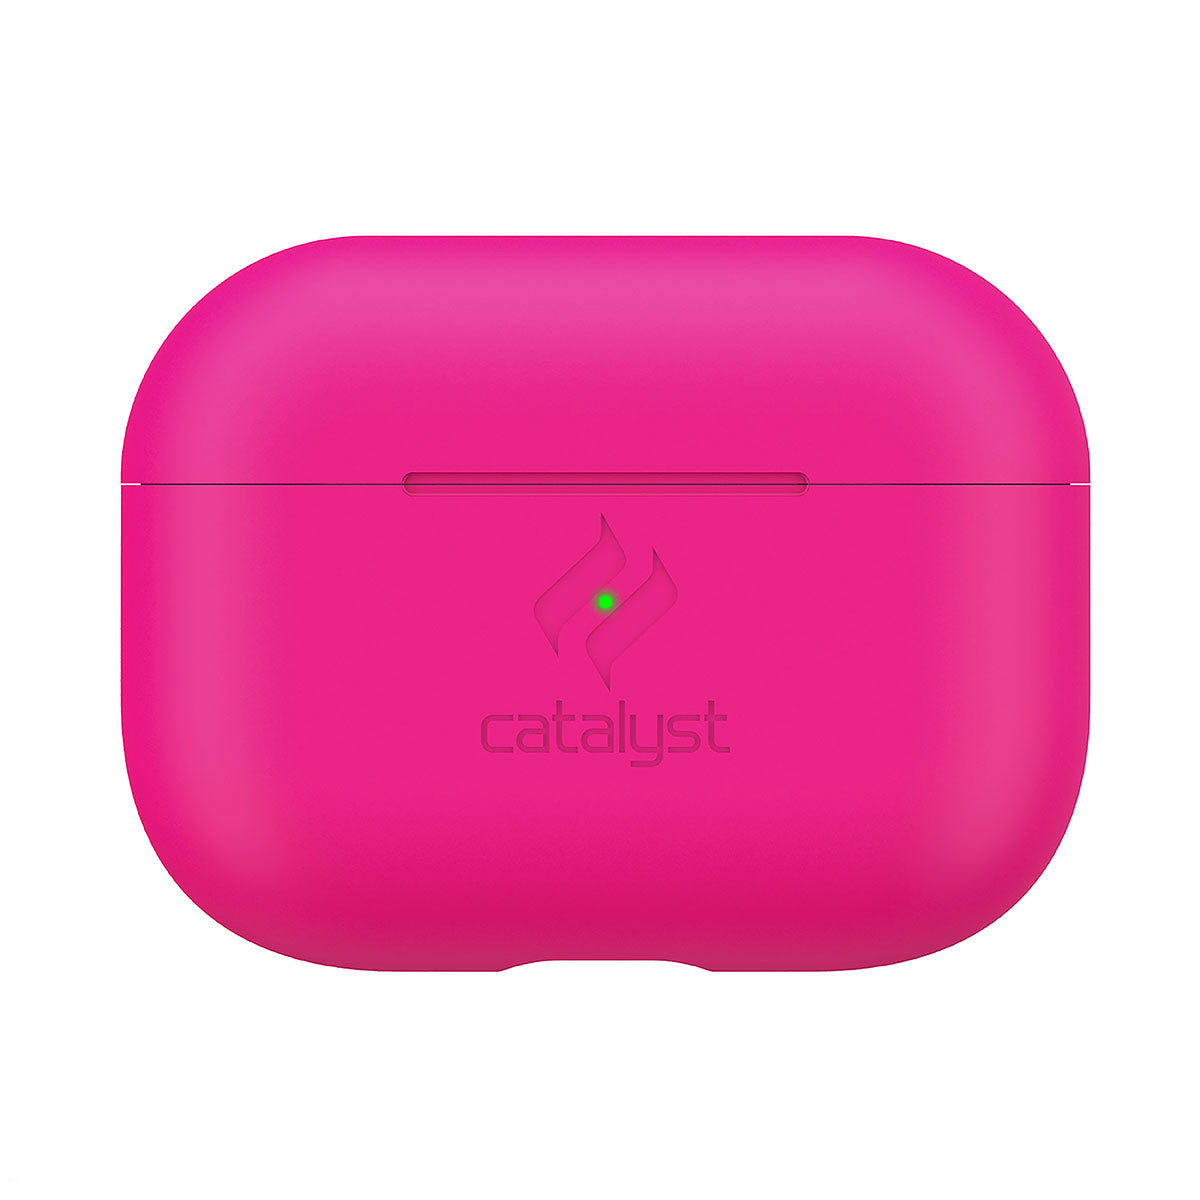 Catalyst airpods pro gen 2/1 slim case showing front view of the case in neon pink colorway